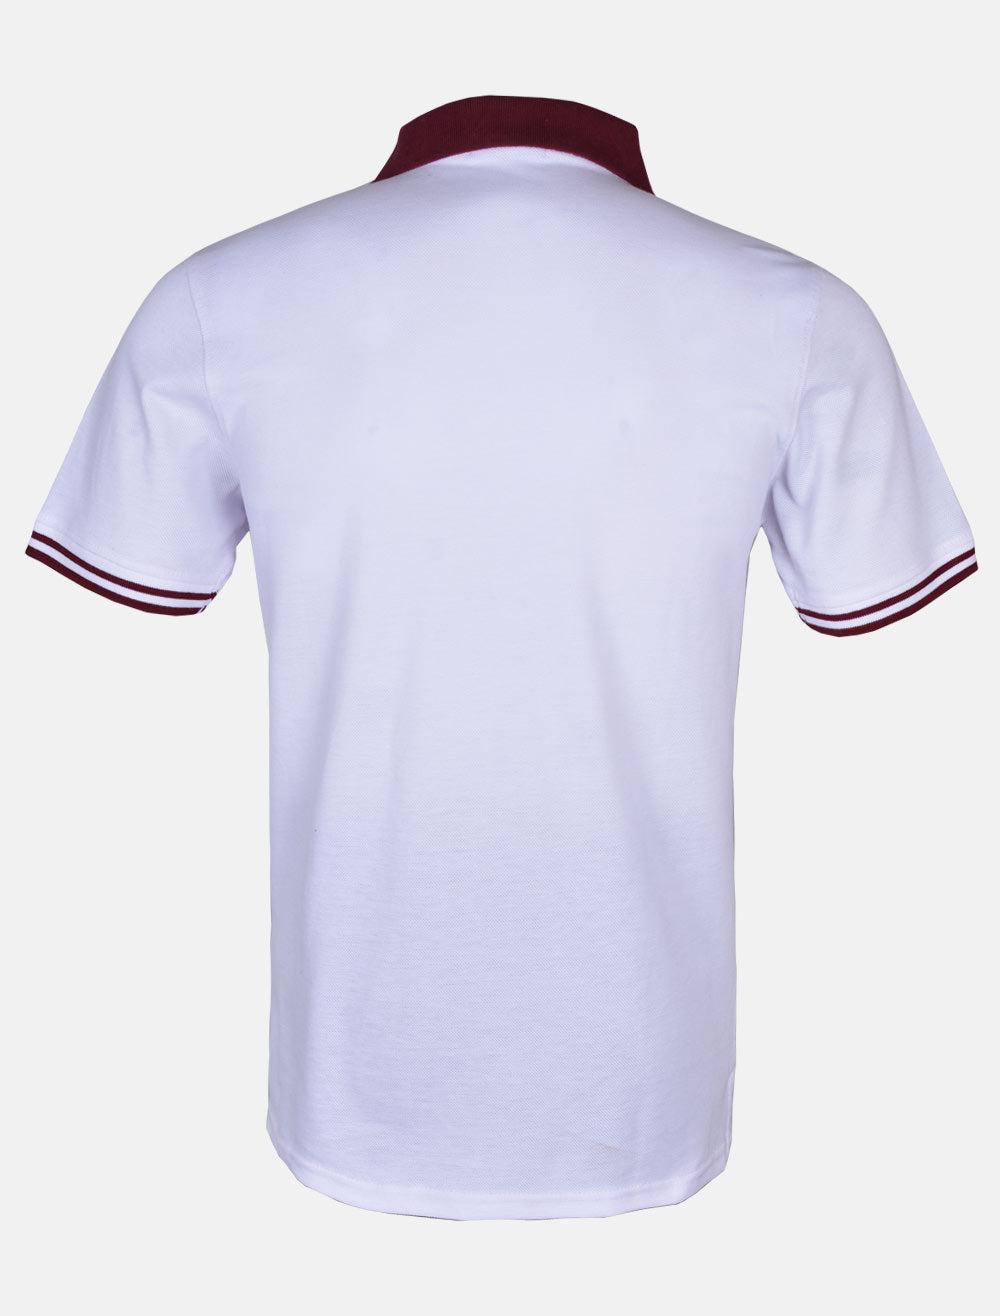 Diner's Men's Polo T-Shirt SKU: NA628-PLUM - Diners